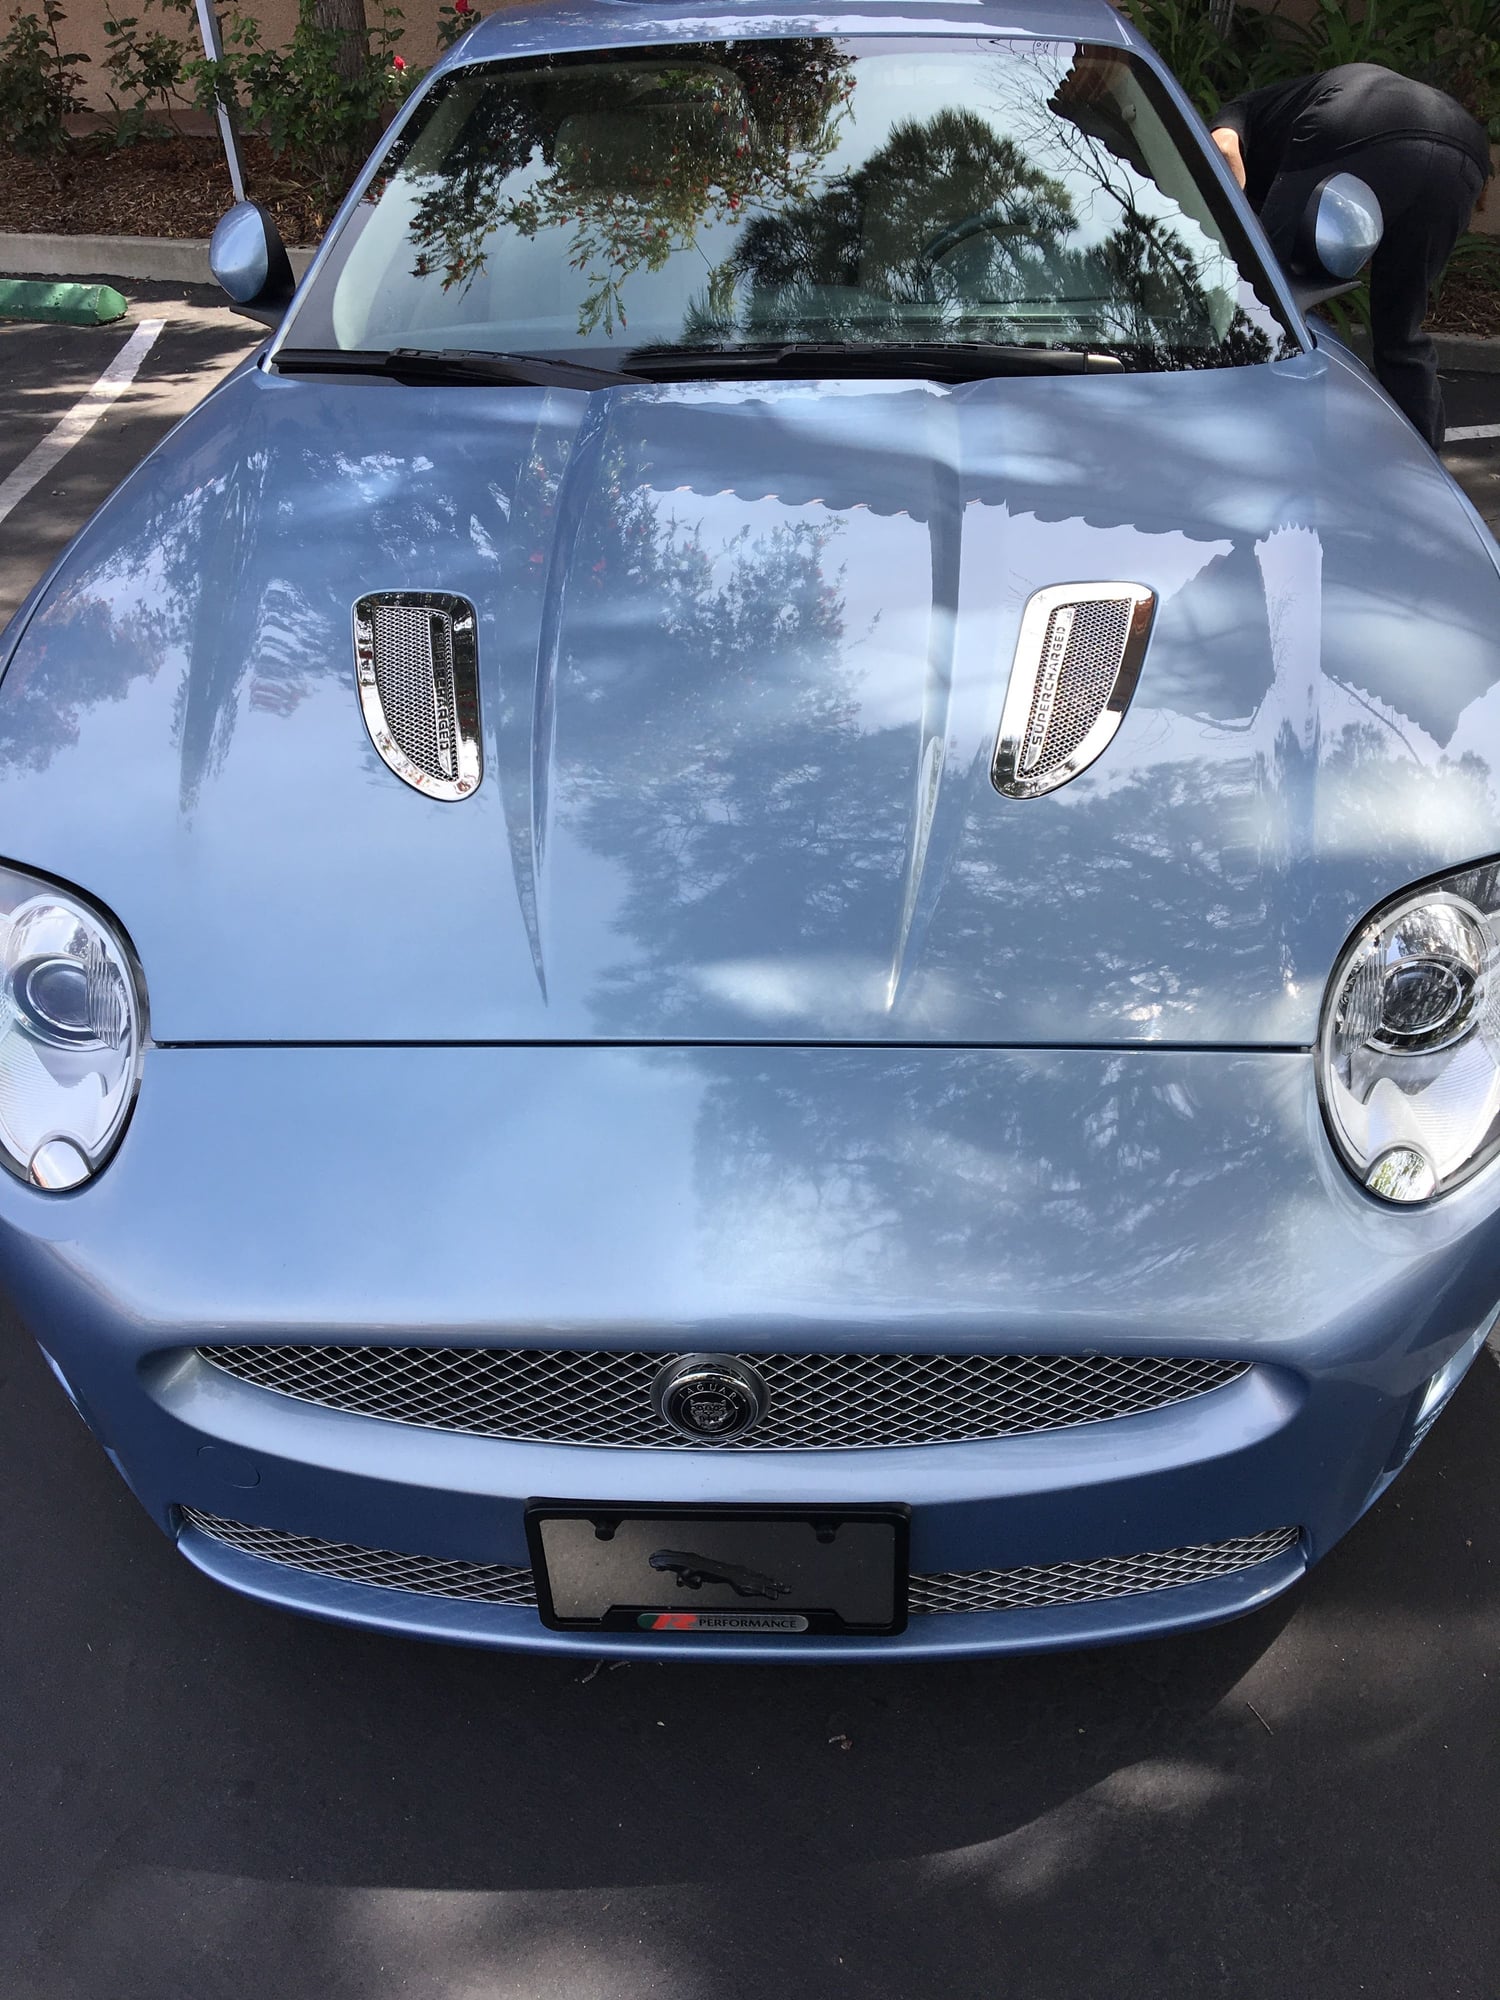 Exterior Body Parts - Jag XKR Supercharged Mesh Hood Louvers - Used - 2007 to 2015 Jaguar XKR - Queen Creek, AZ 85143, United States